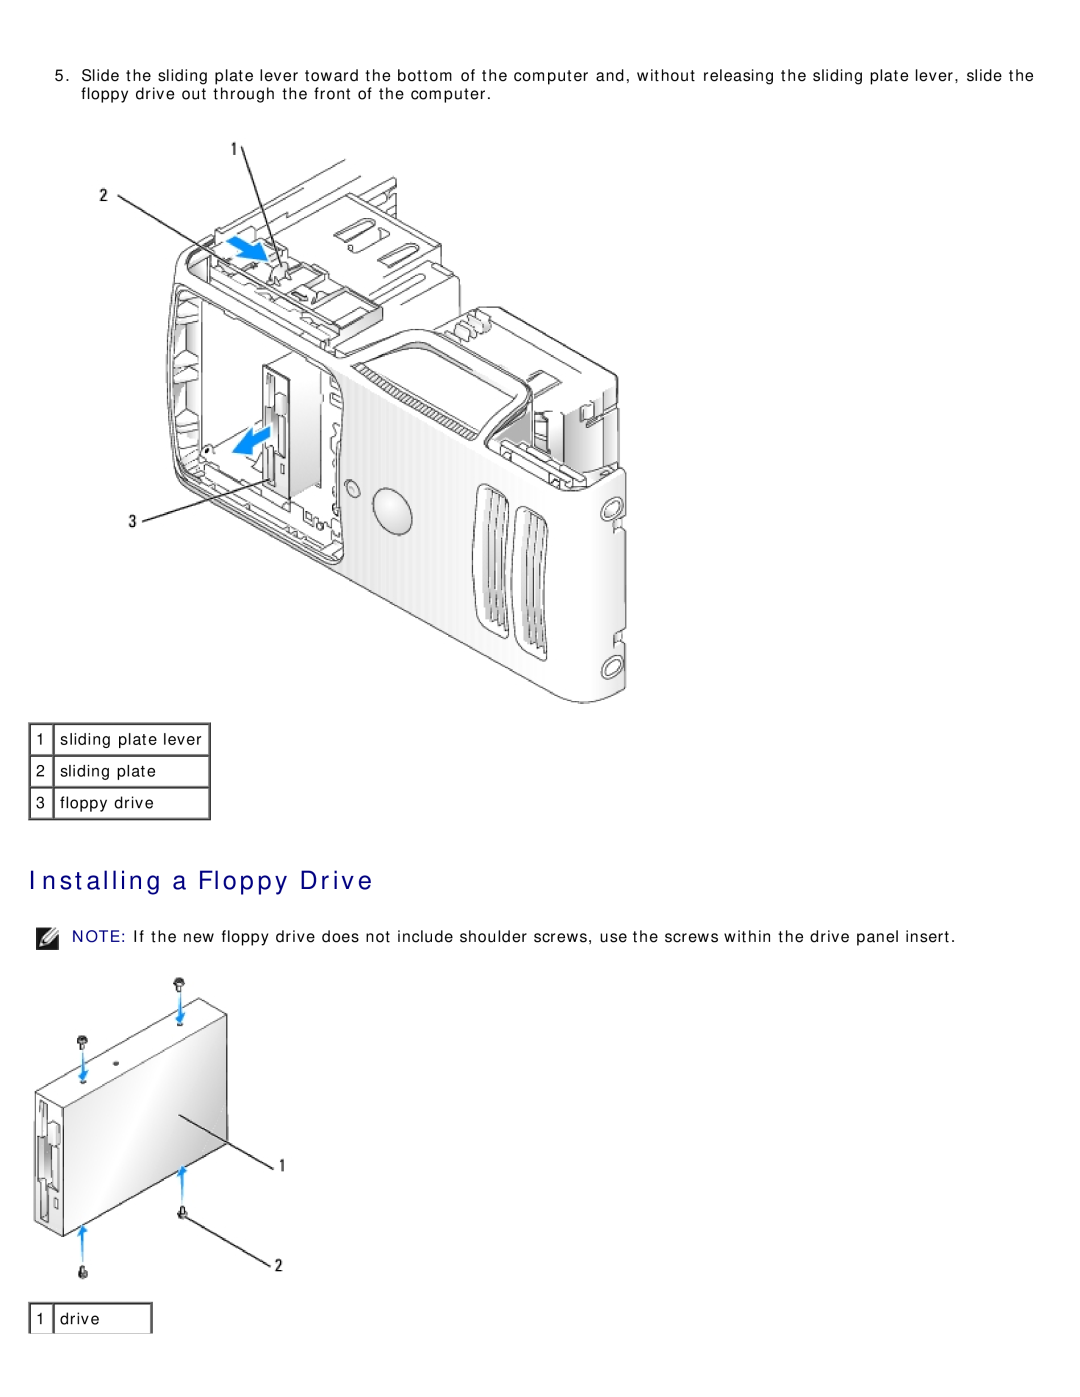 Dell DCSM manual Installing a Floppy Drive, sliding plate lever 2 sliding plate 3 floppy drive 